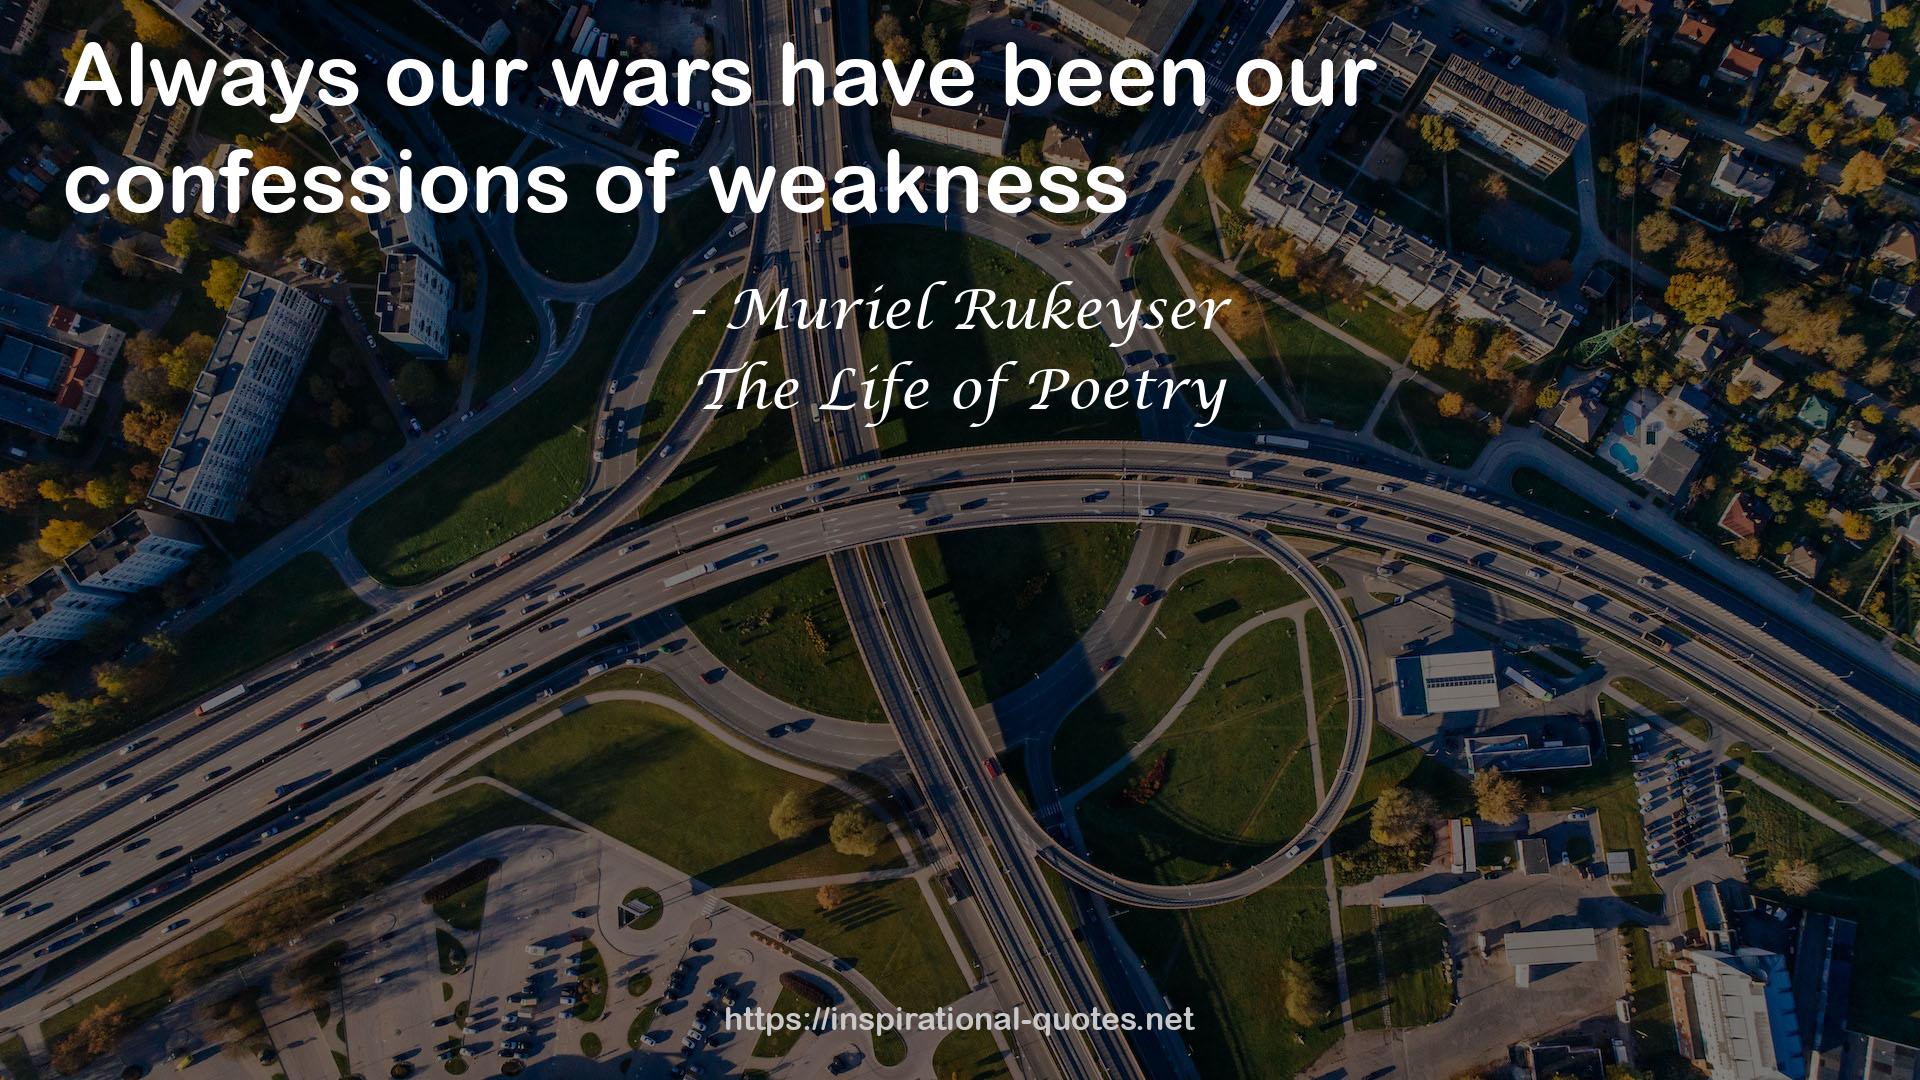 The Life of Poetry QUOTES